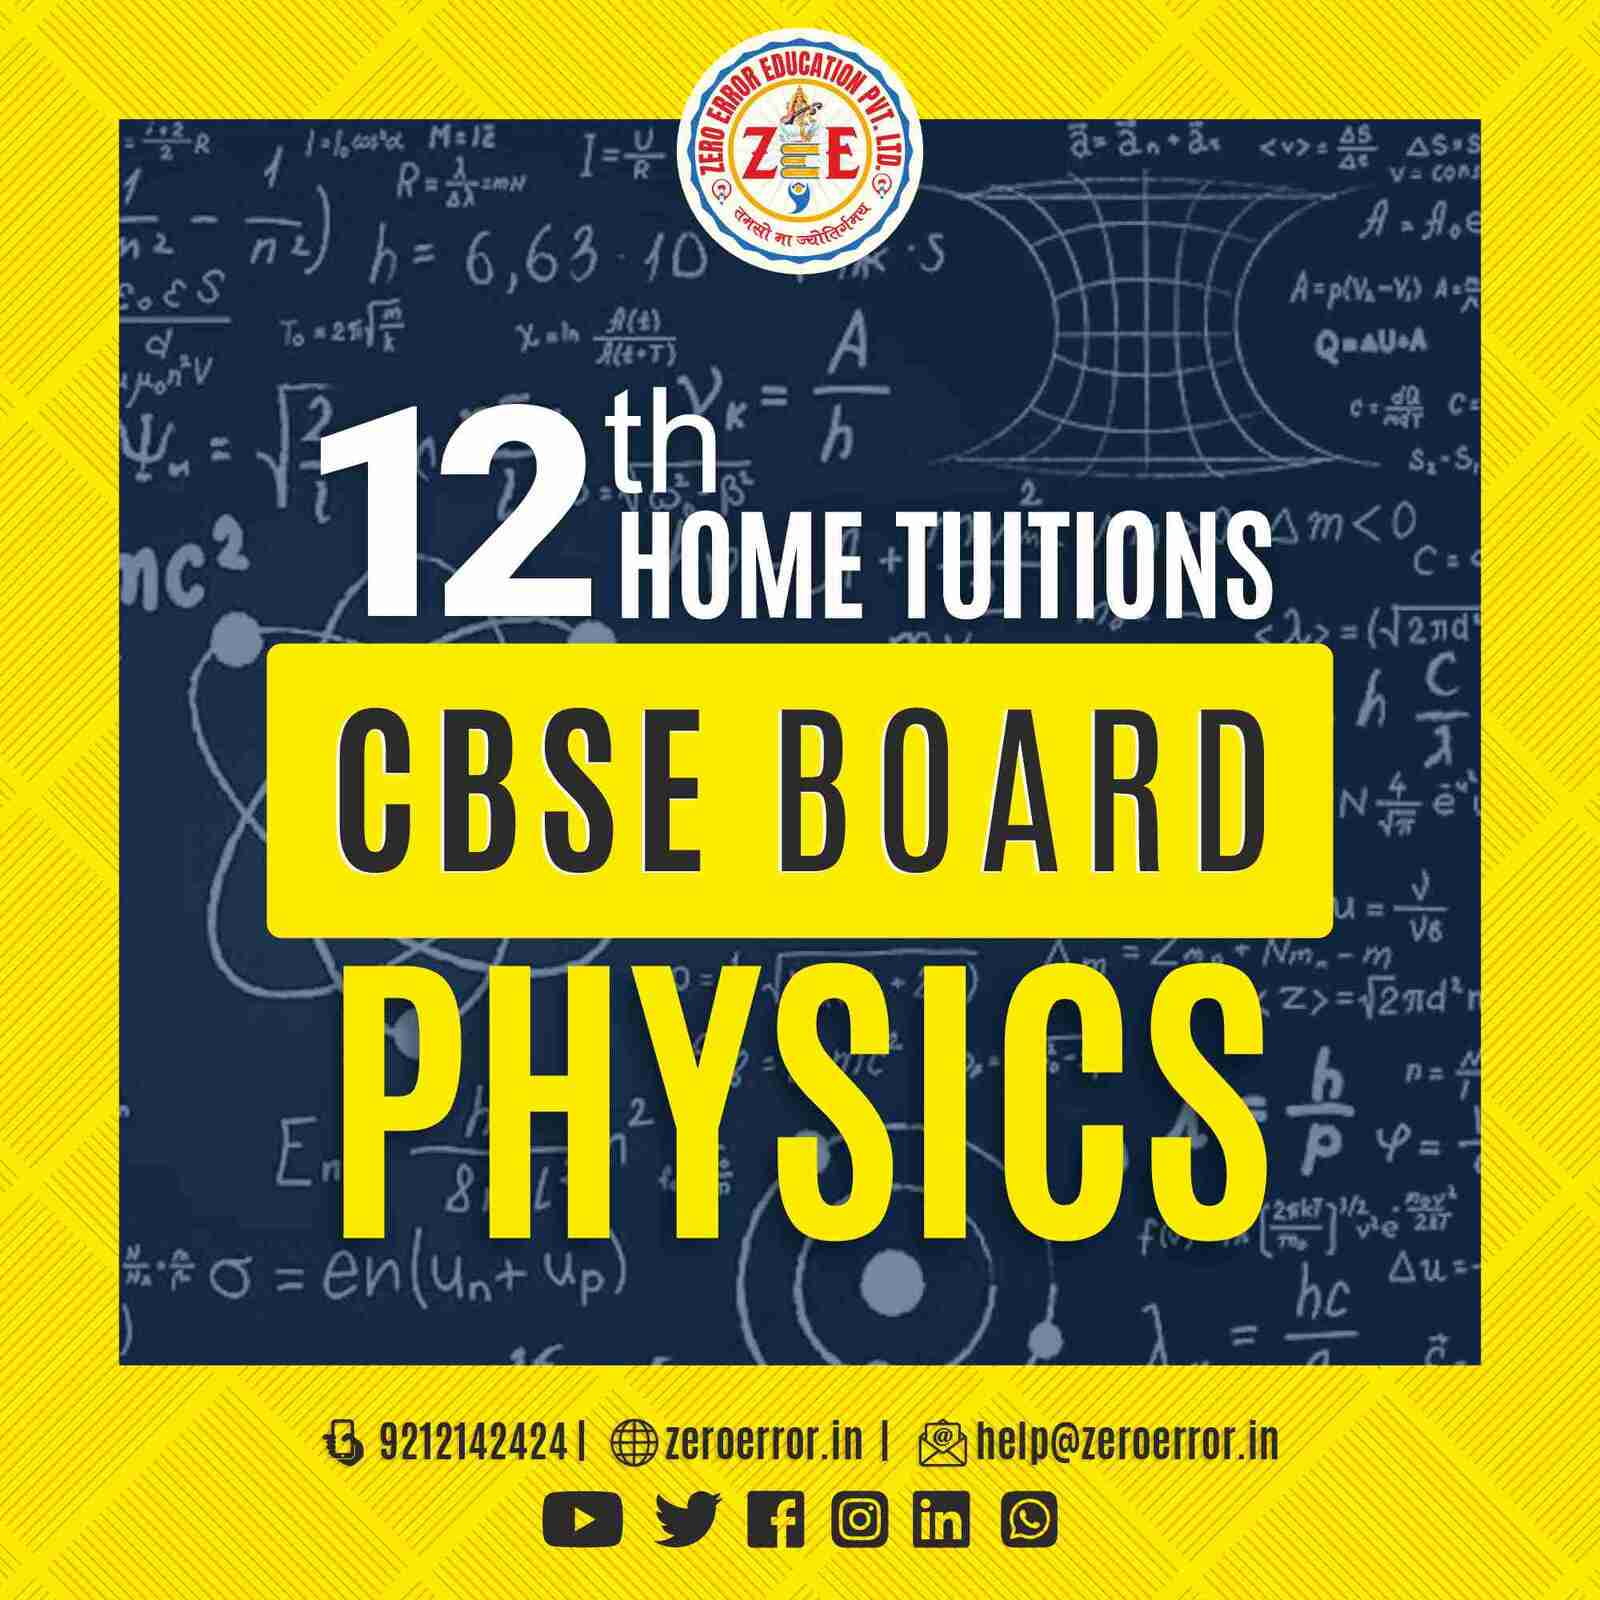 12th Grade CBSE Physics Online Classes by Zero Error Education Prepare for your CBSE board exams with online and offline Physics classes for 12th grade. Learn from experienced home tutors and get all the help you need to succeed. Enroll today at Zero Error Education. [https://zeroerror.in/] Call 9212142424 for more information.